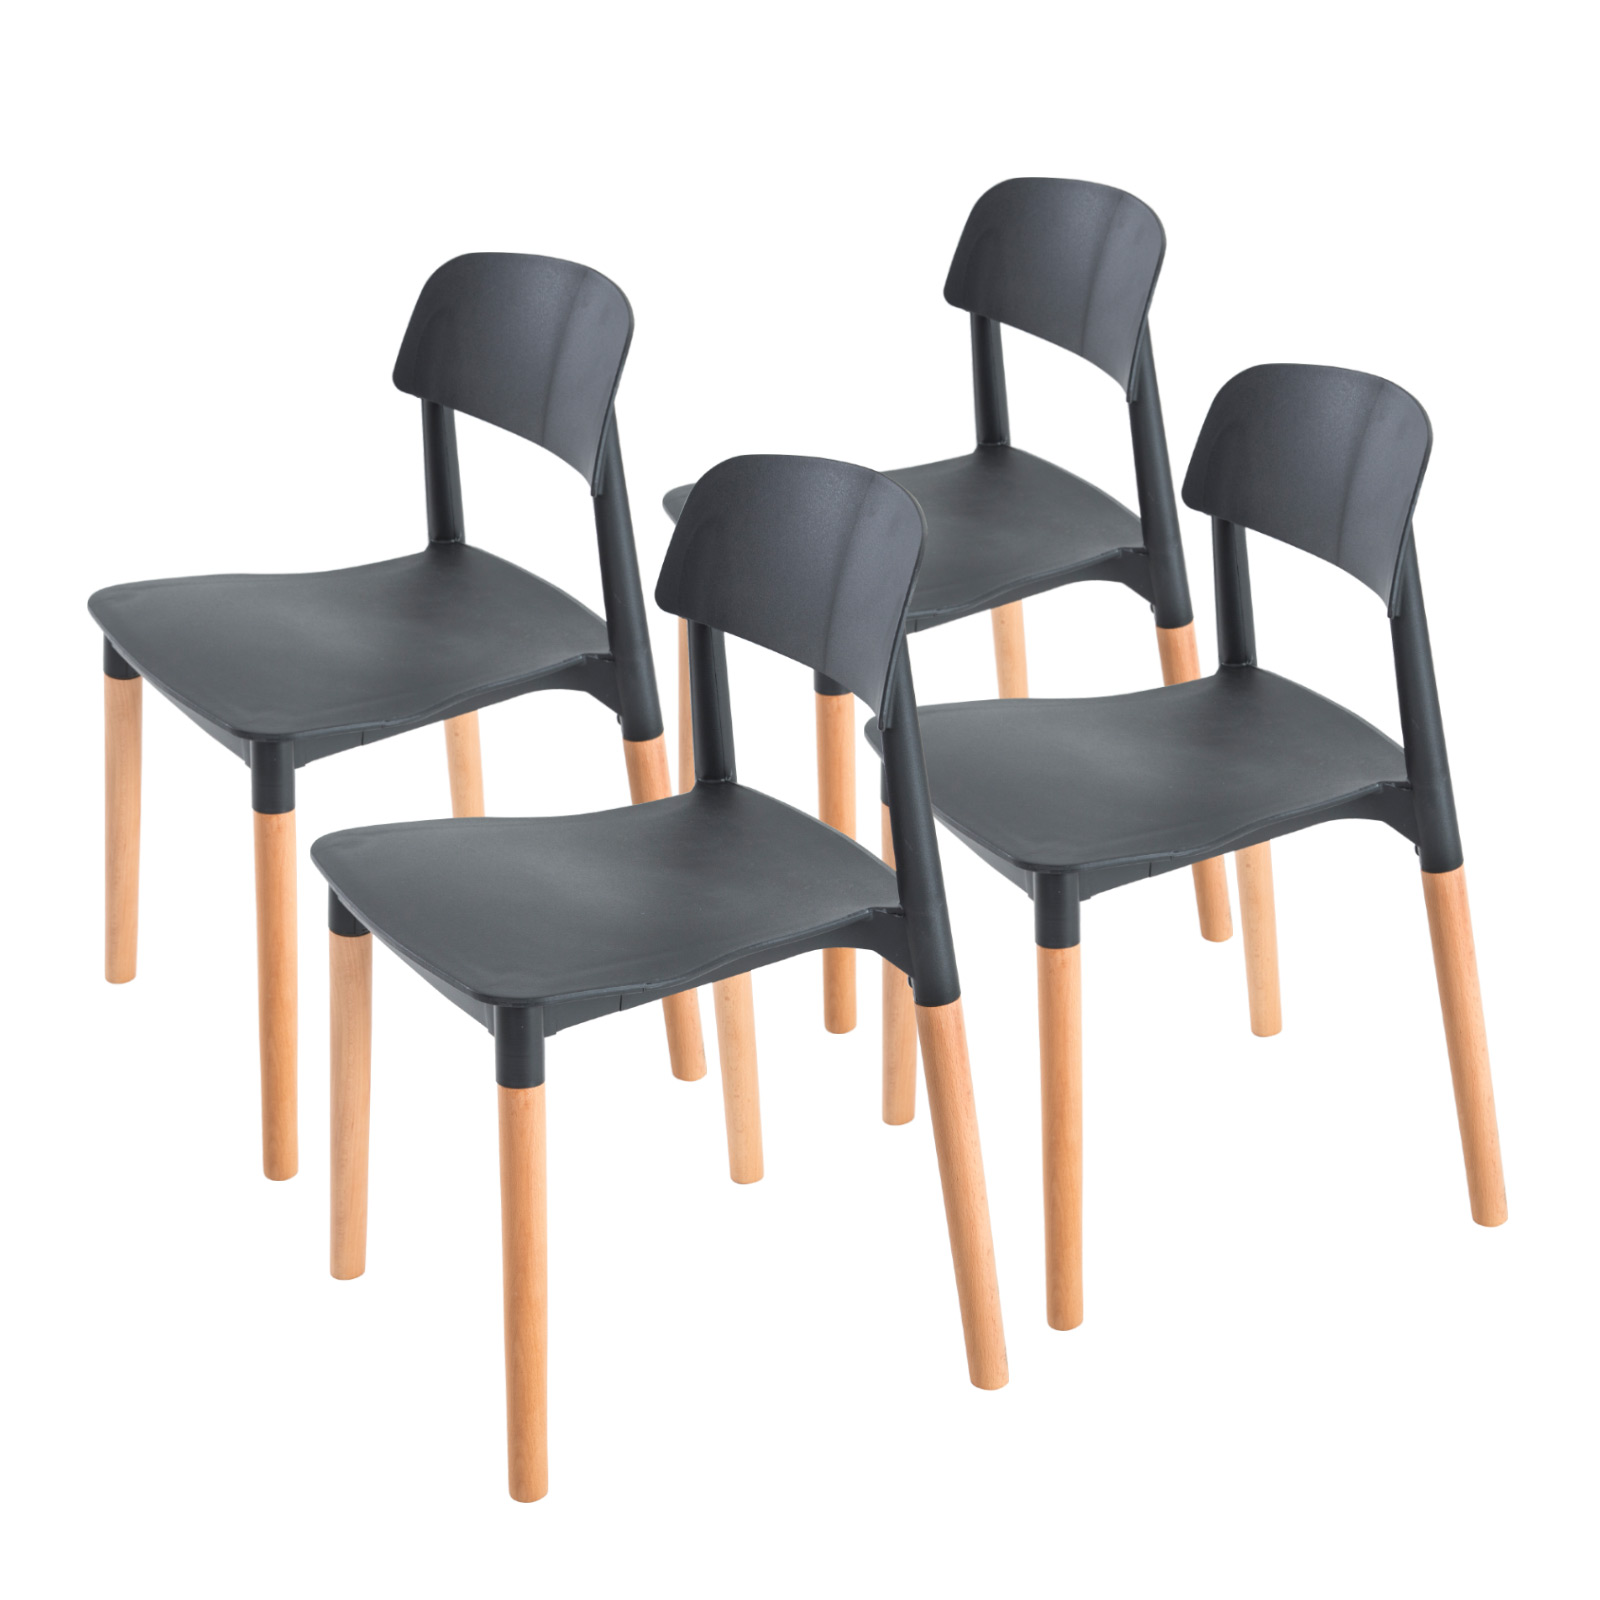 4X Belloch Stackable Dining Chair - BLACK